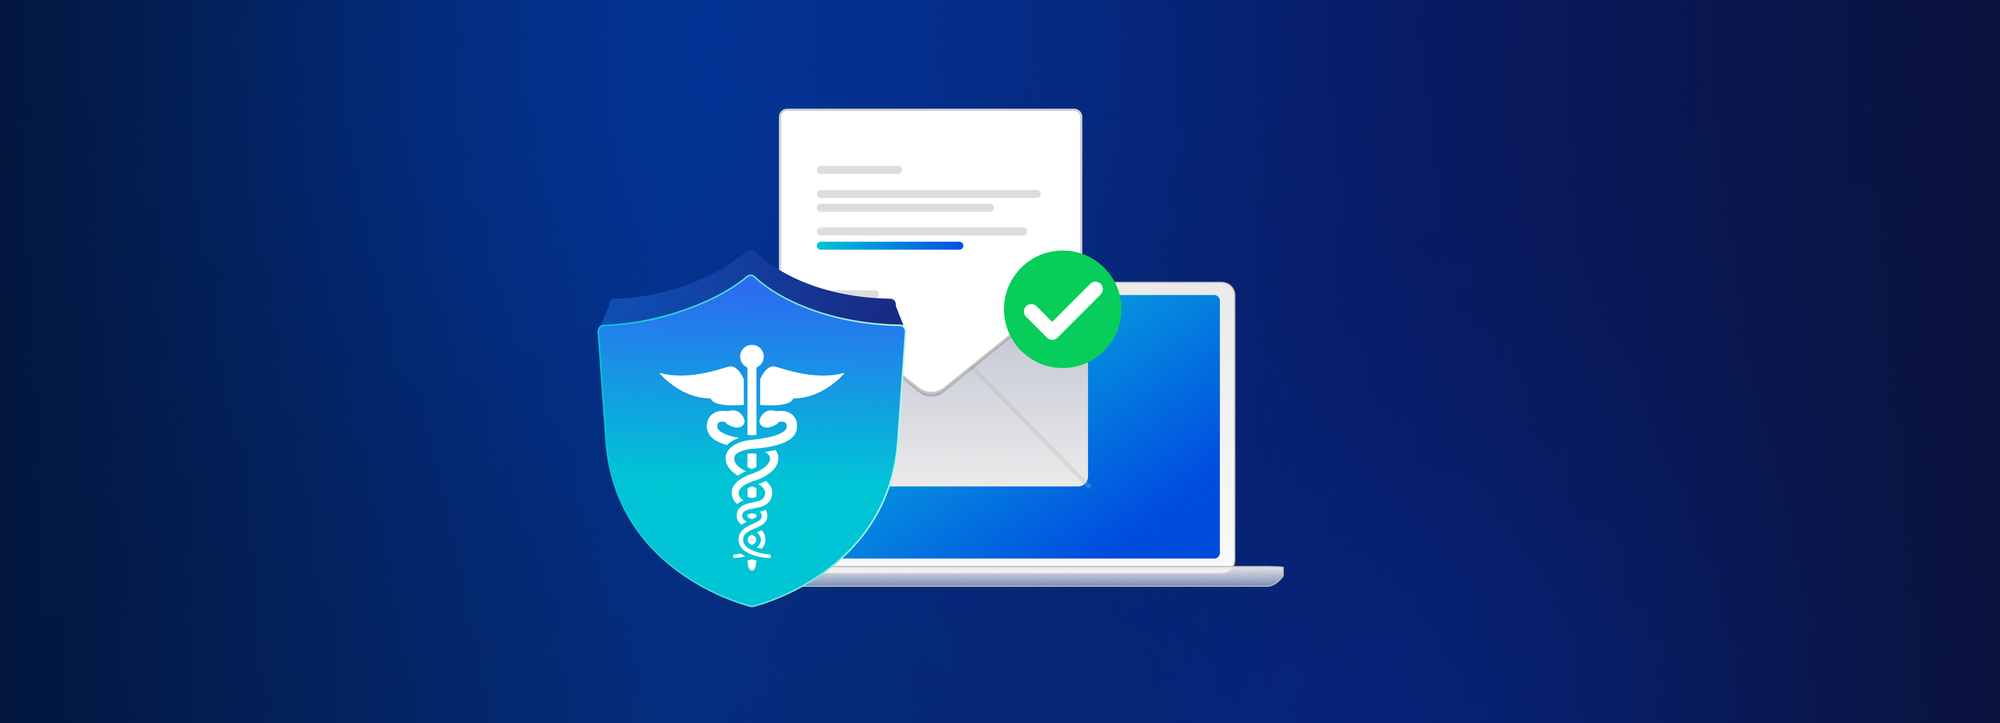 The what, why, how and how not-to of sending HIPAA-compliant emails, explained